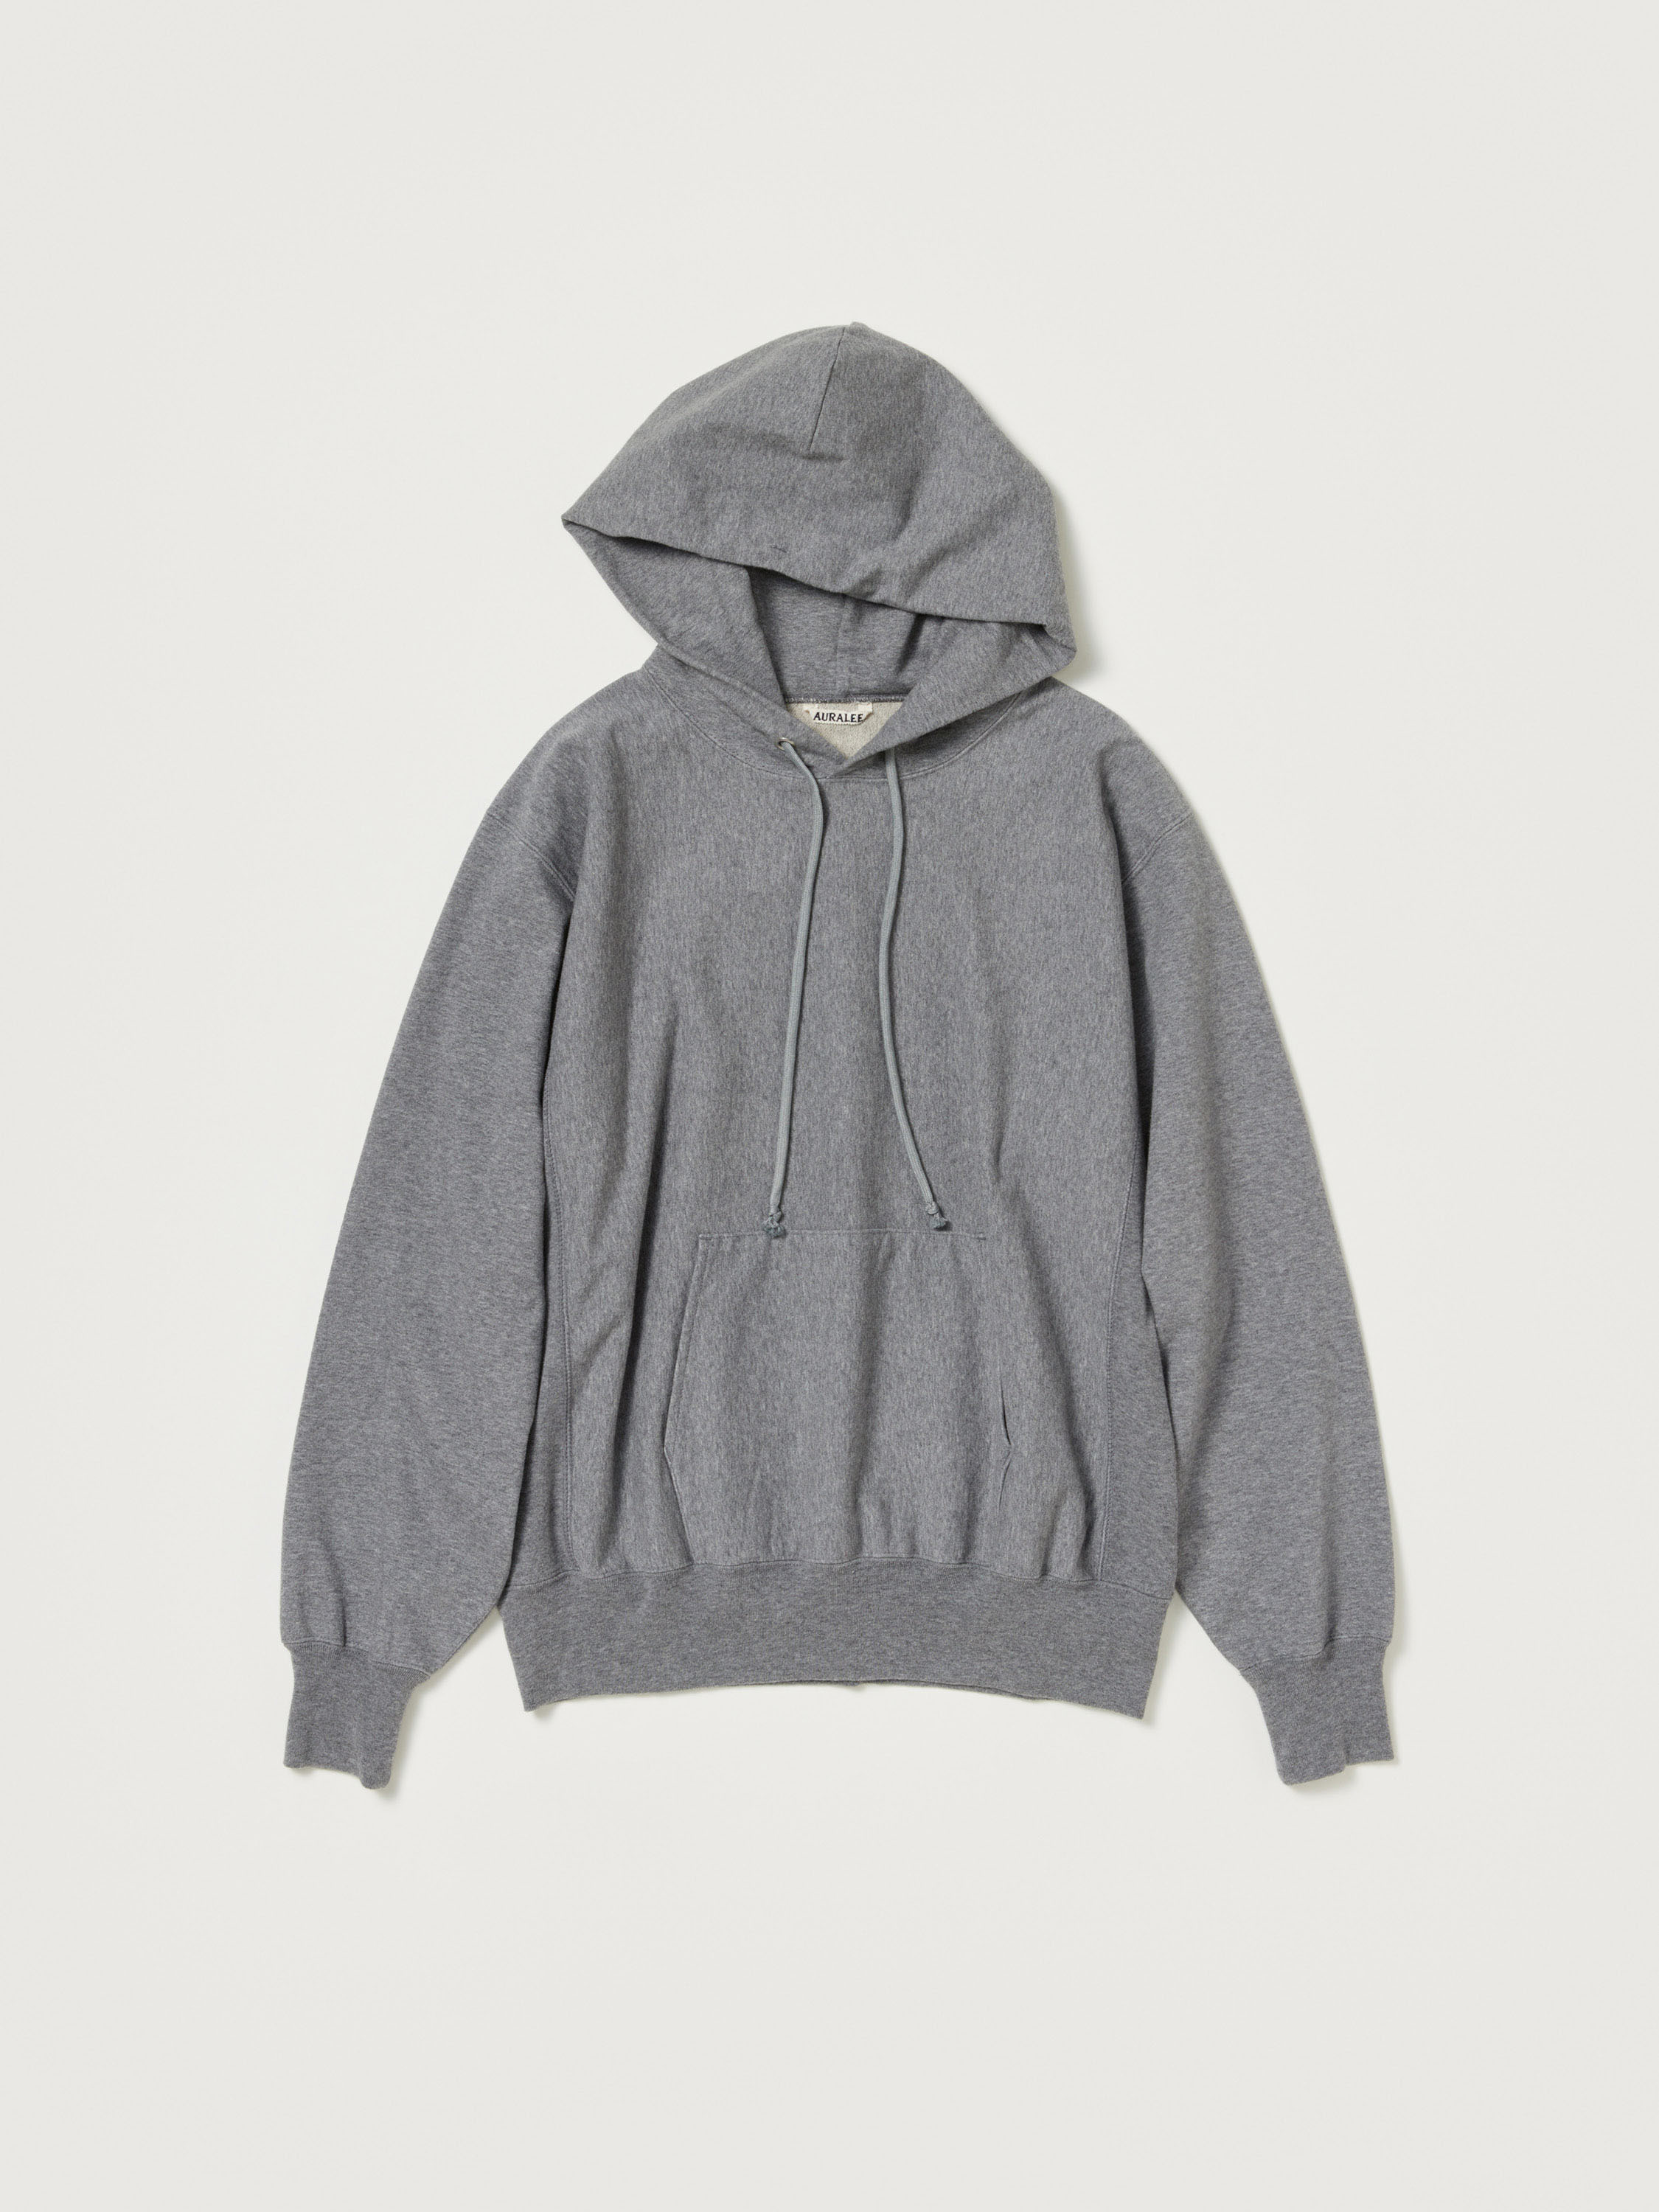 SUPER MILLED SWEAT P/O PARKA 詳細画像 TOP CHARCOAL 1